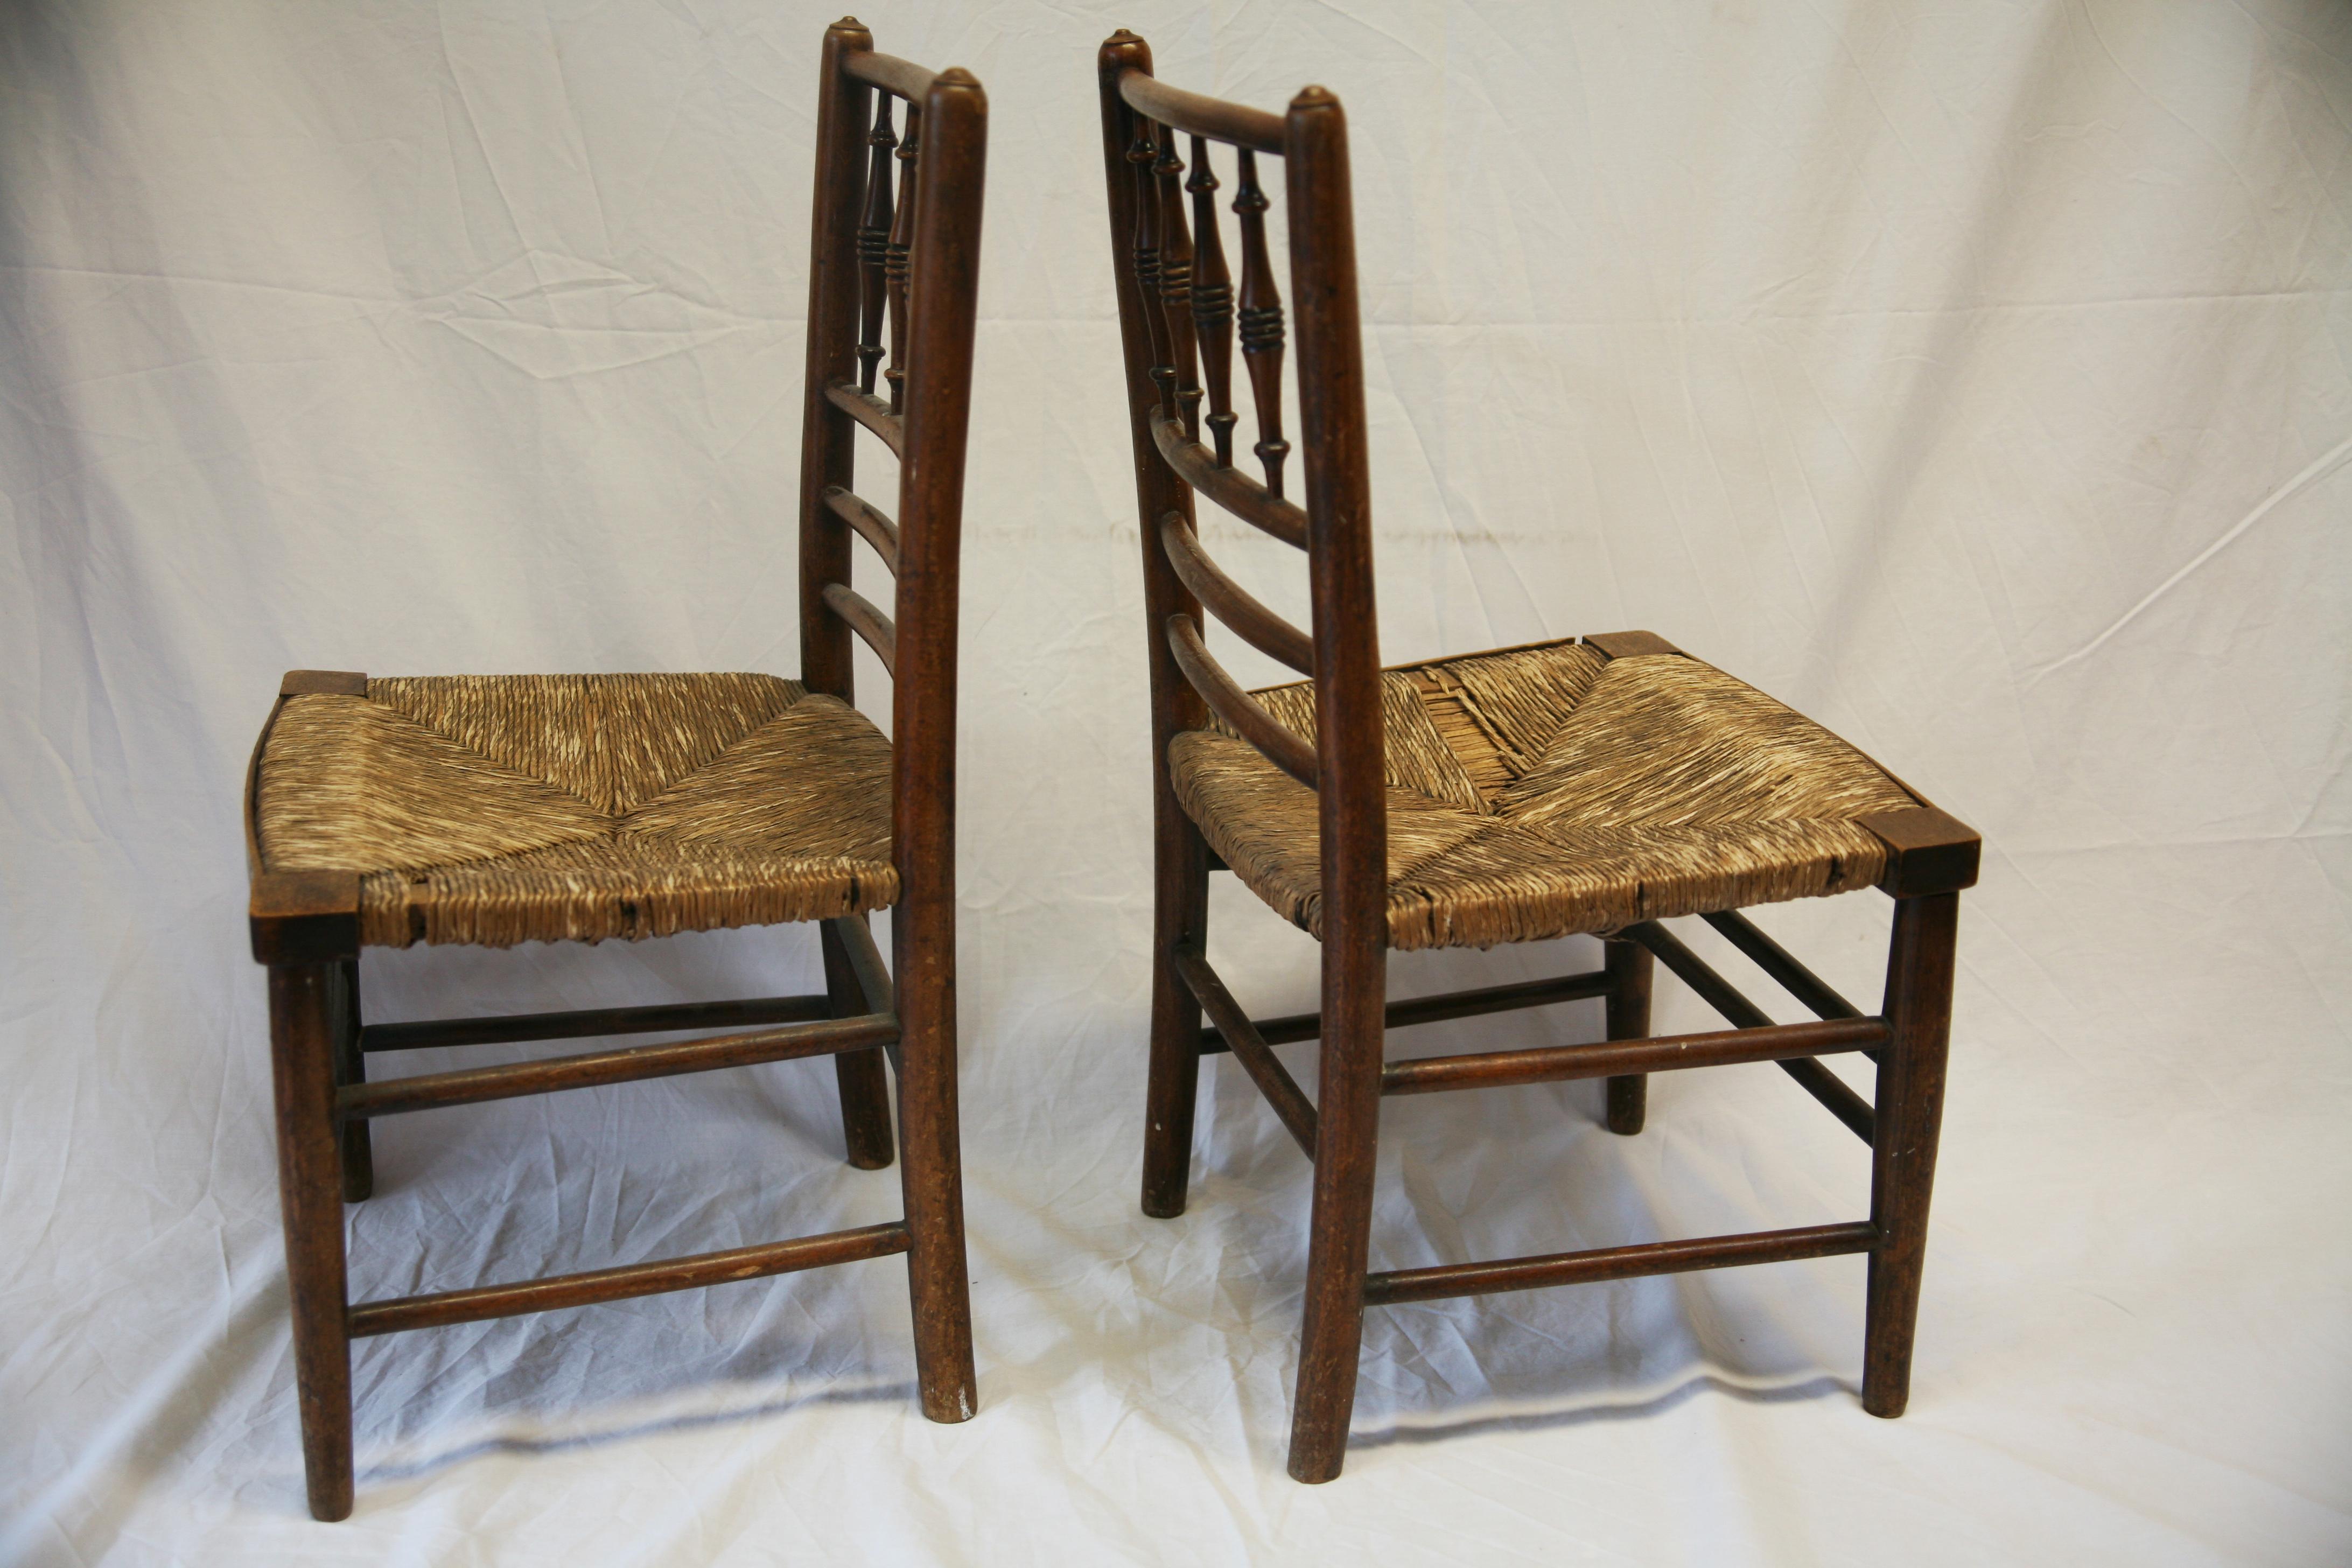 A charming pair of antique Morris and Co. children's rush seat chairs with turned spindle backs from the 1900s.

Height : 63 cm - 24.8 in
Width : 34 cm - 13.39 in
Depth : 30 cm - 11.81 in 

A charming pair of antique Morris and Co. children's